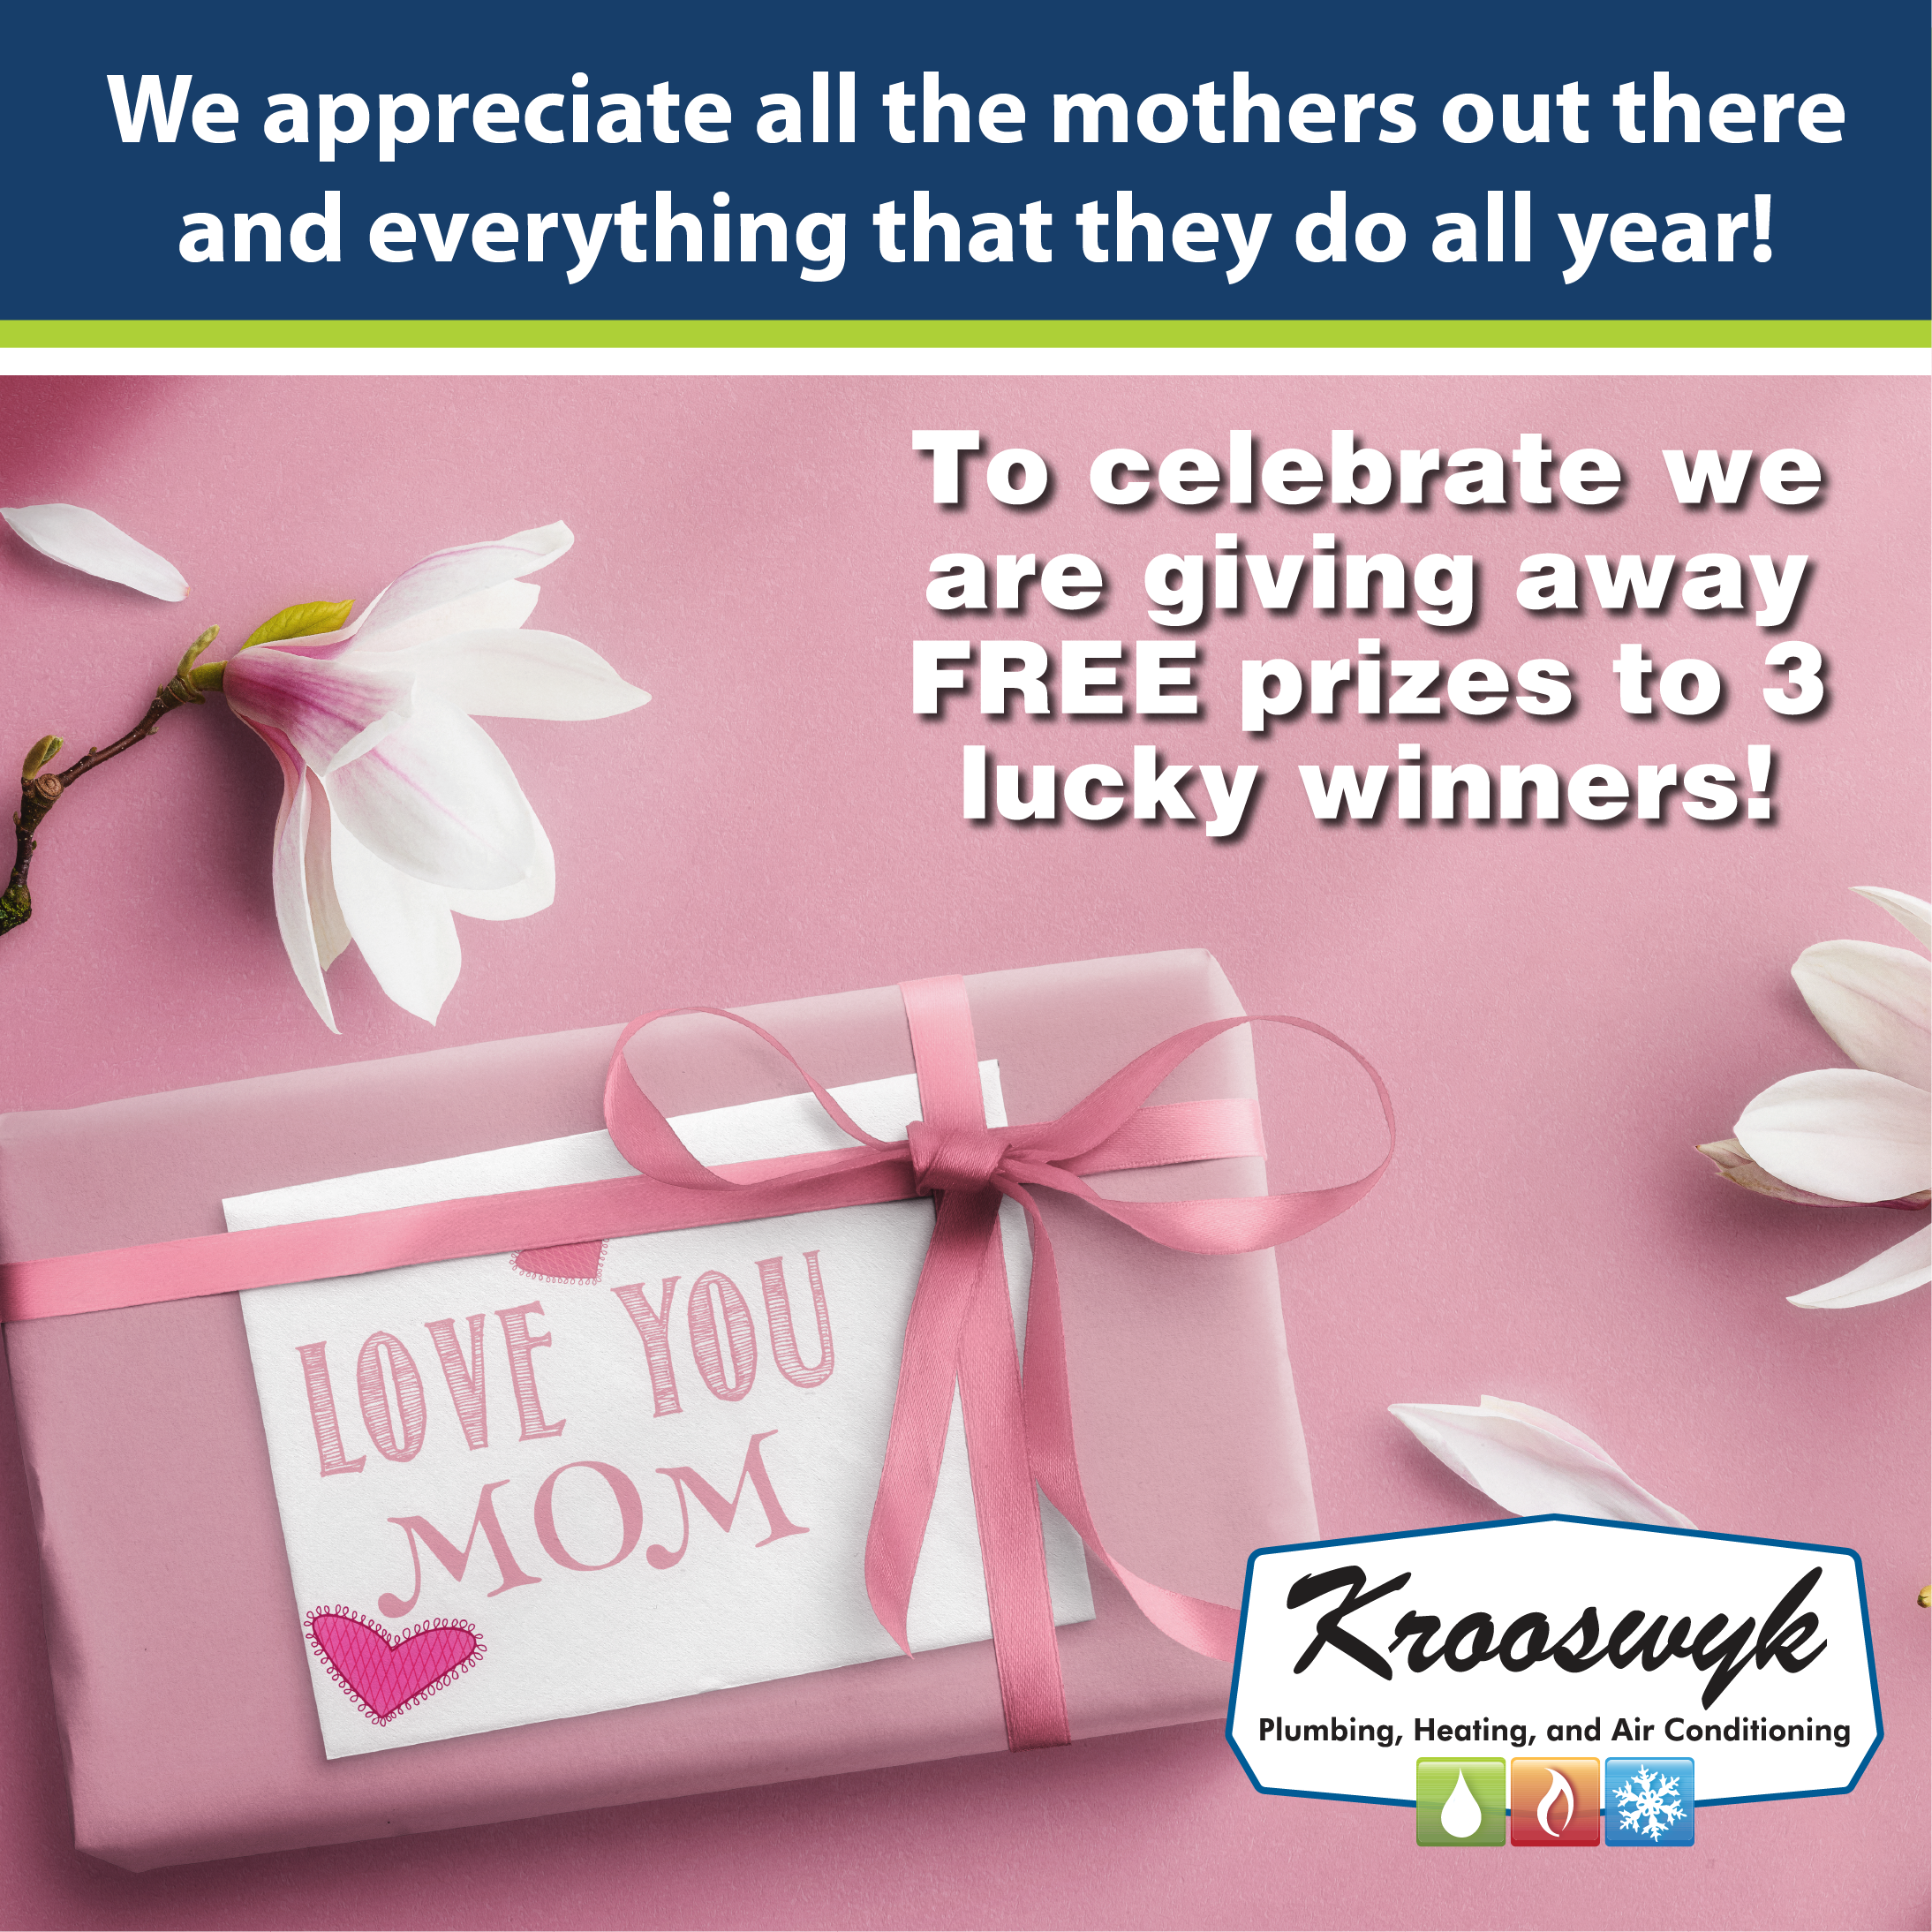 Enter our annual Mother's Day Giveaway today!